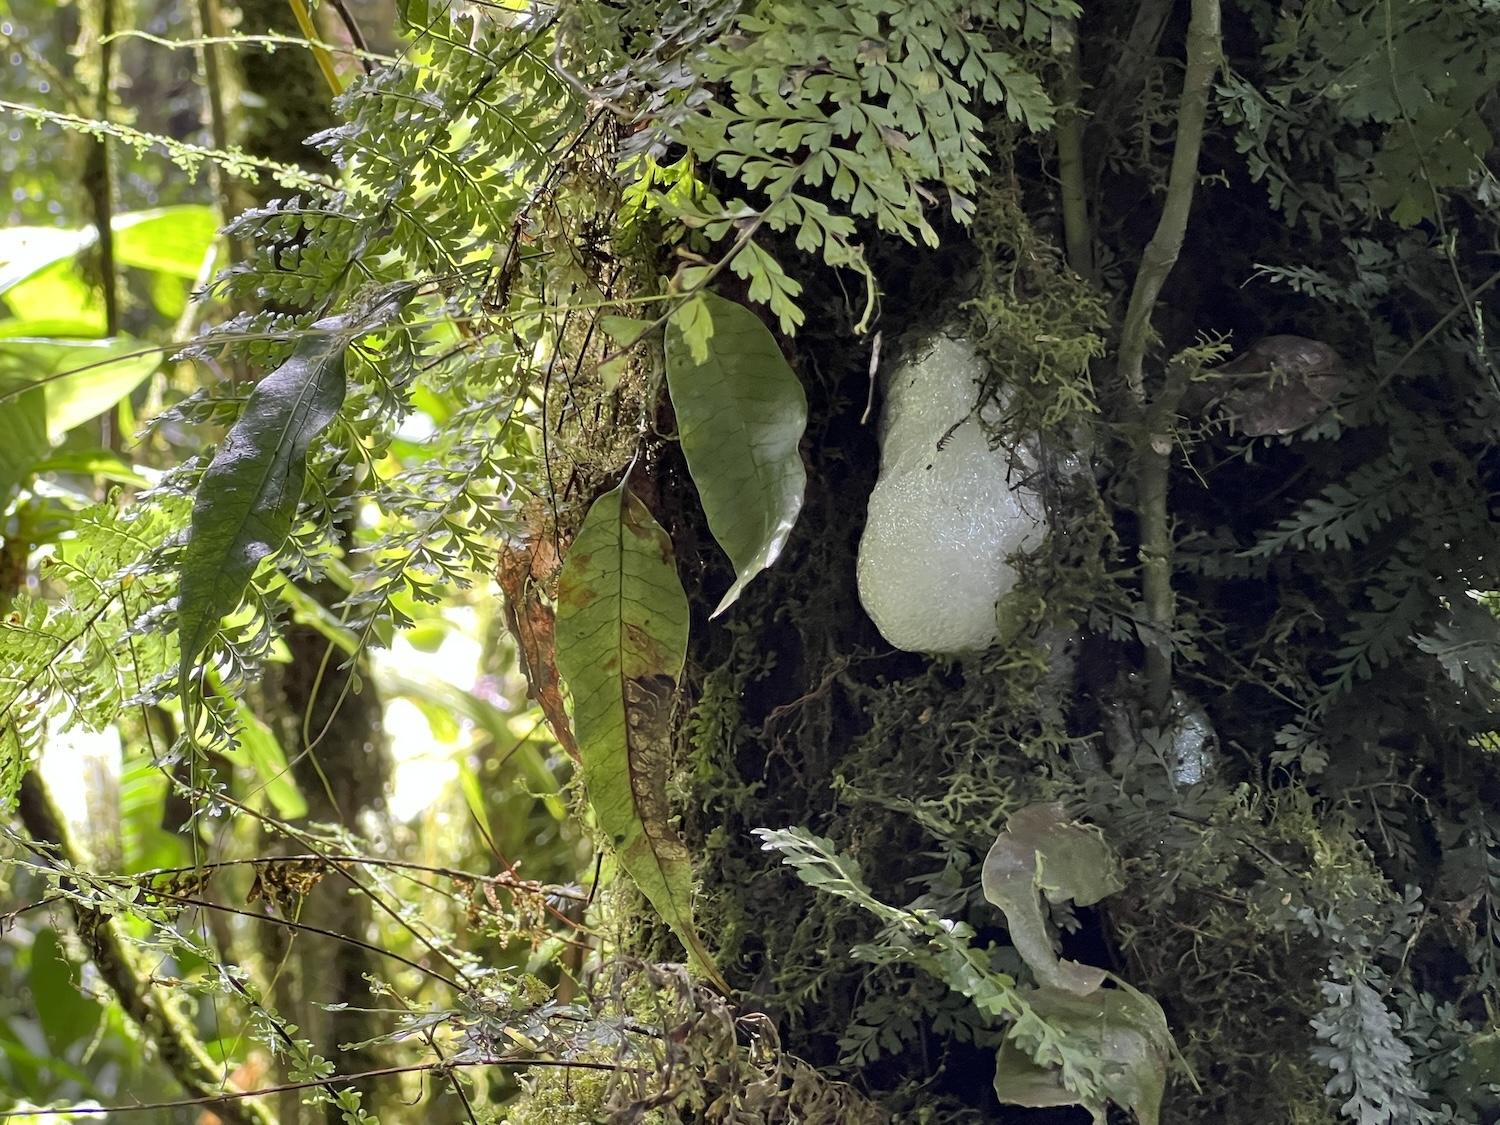 In Santa Elena Cloud Forest Reserve, the túngara frog protects its eggs with a foam mass.